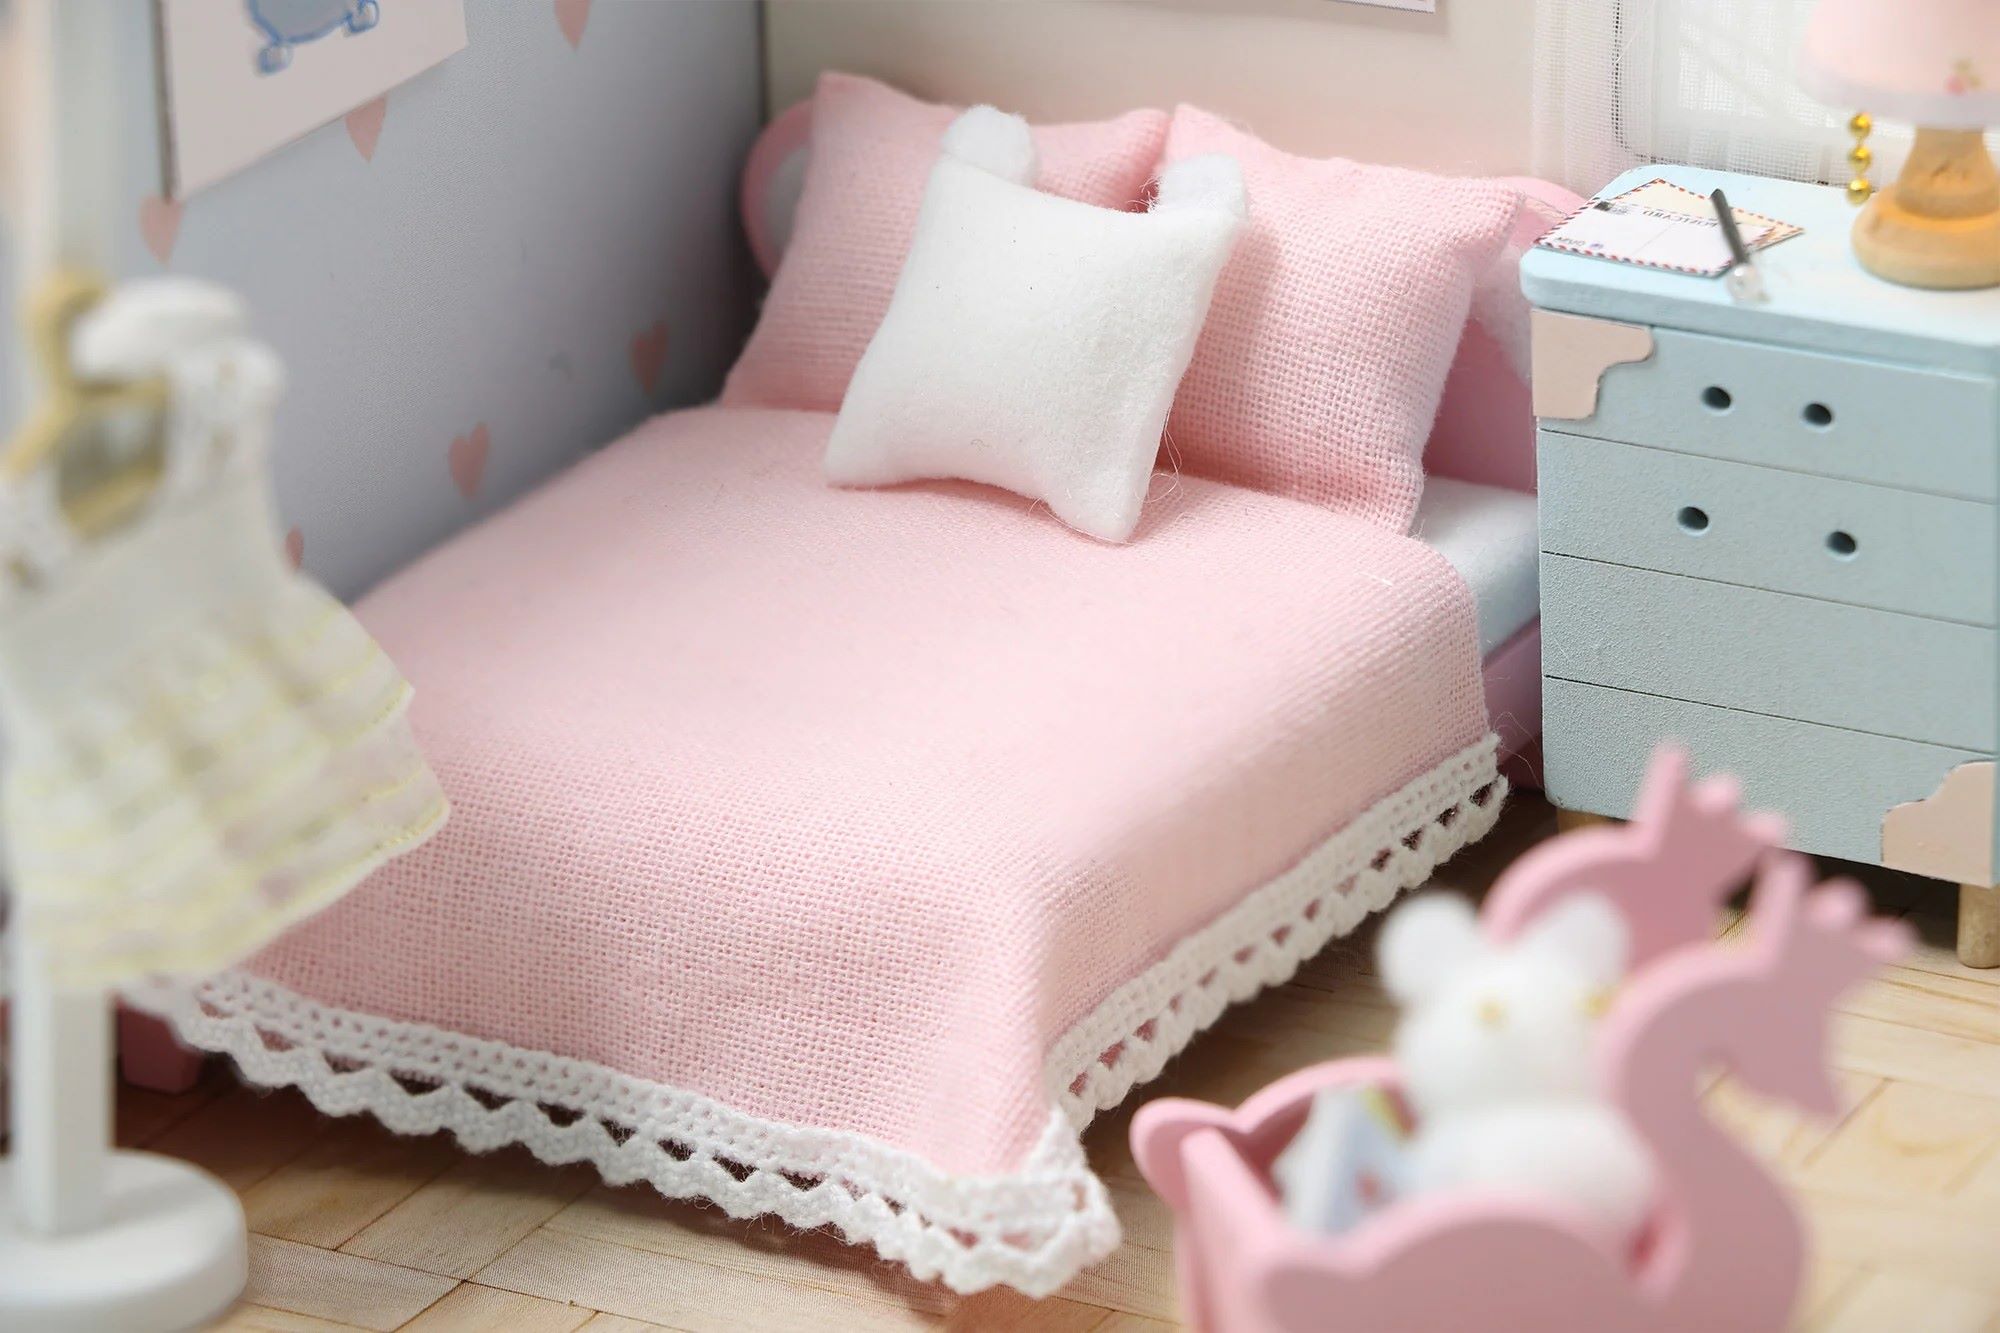 Create Your Own Miniature Bedroom with These DIY Projects